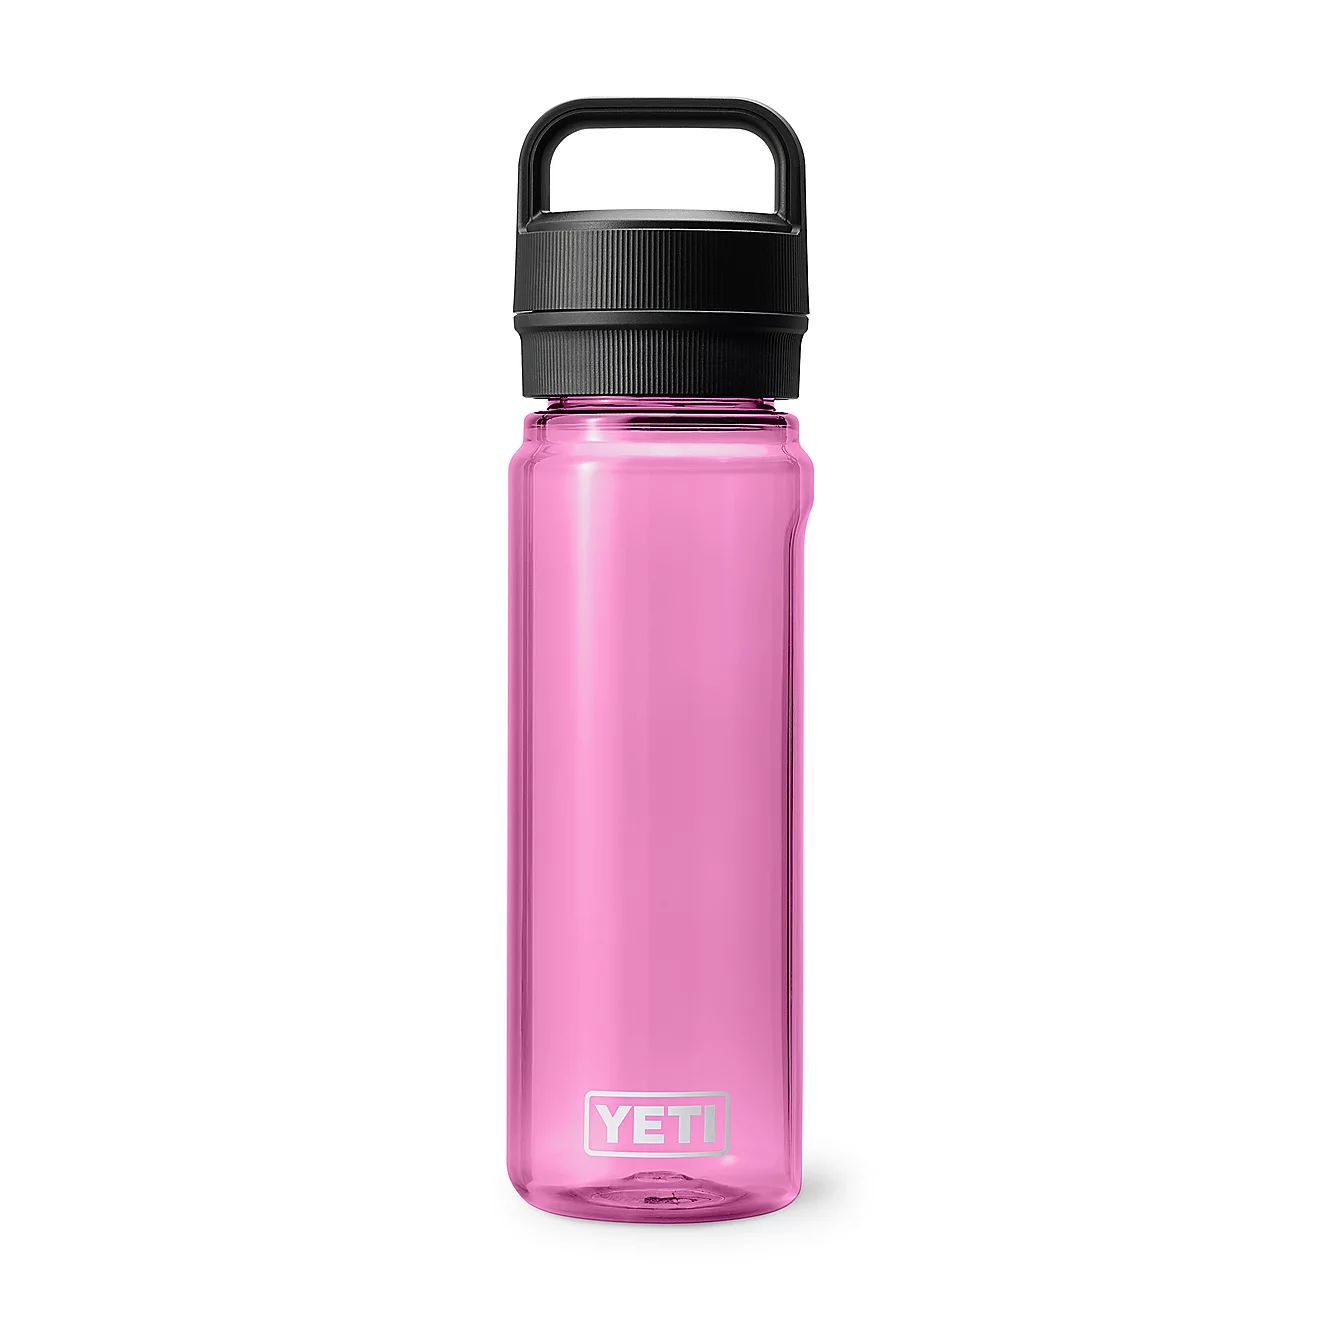 YETI Yonder 0.75L Water Bottle | Free Shipping at Academy | Academy Sports + Outdoors